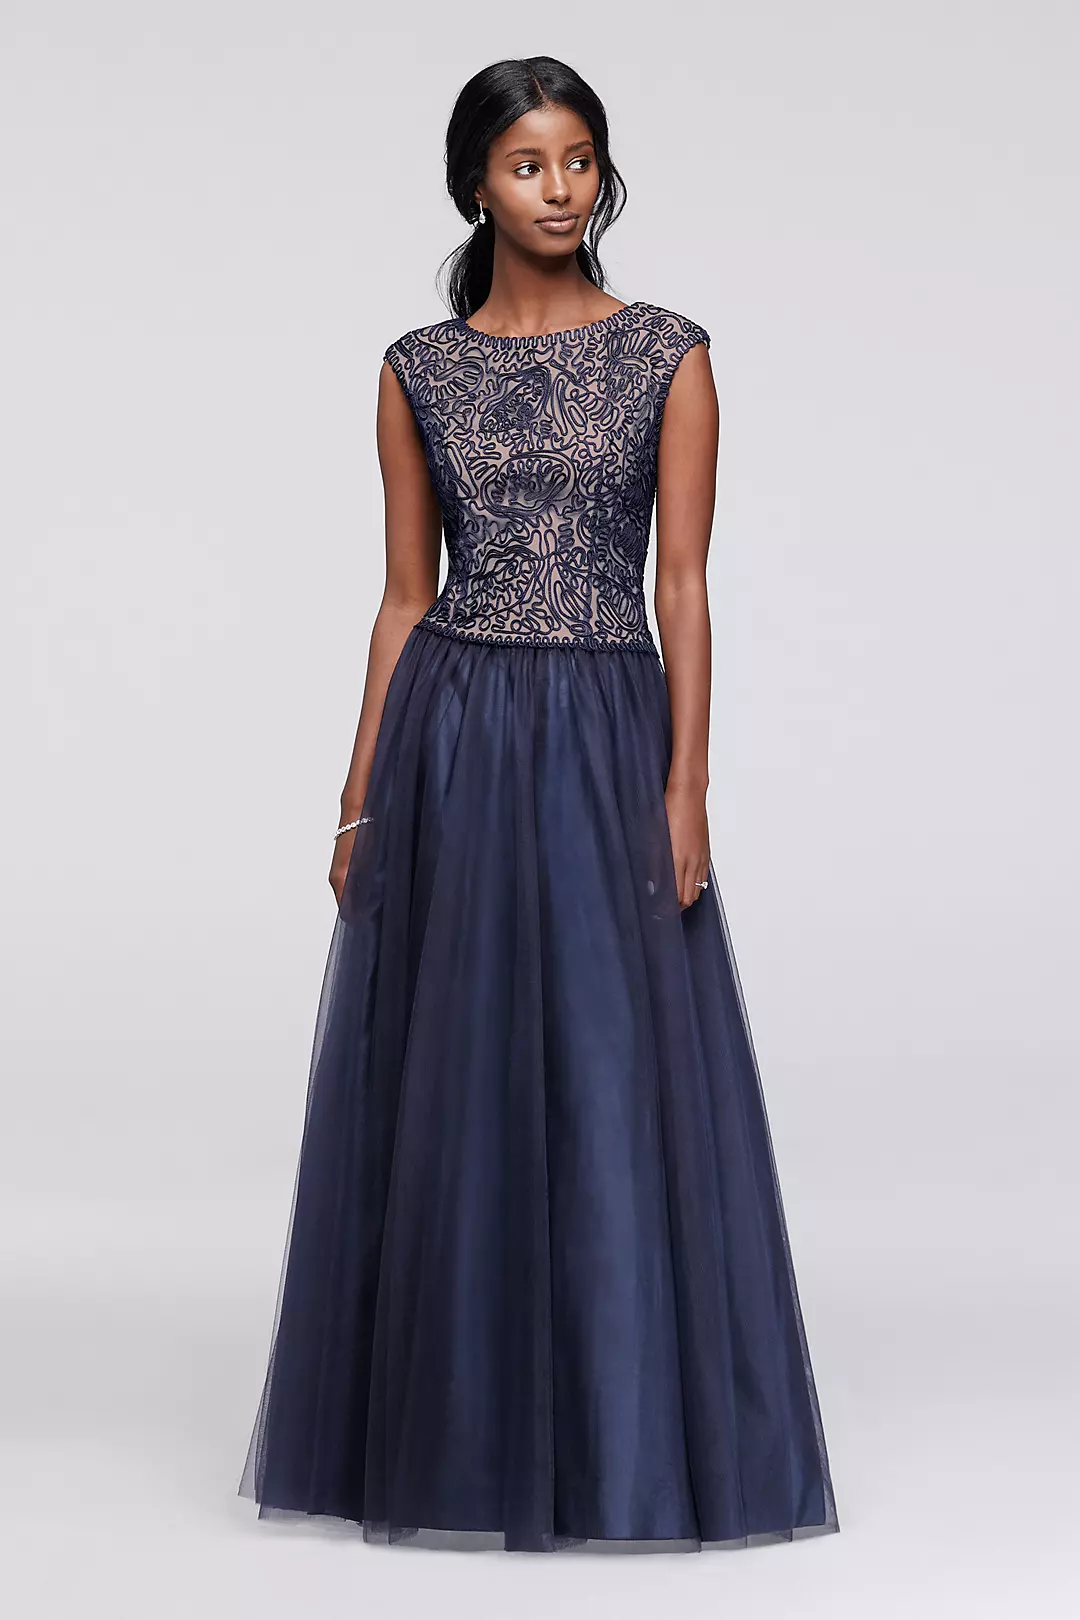 Tulle Ball Gown with Embroidered Bodice Image